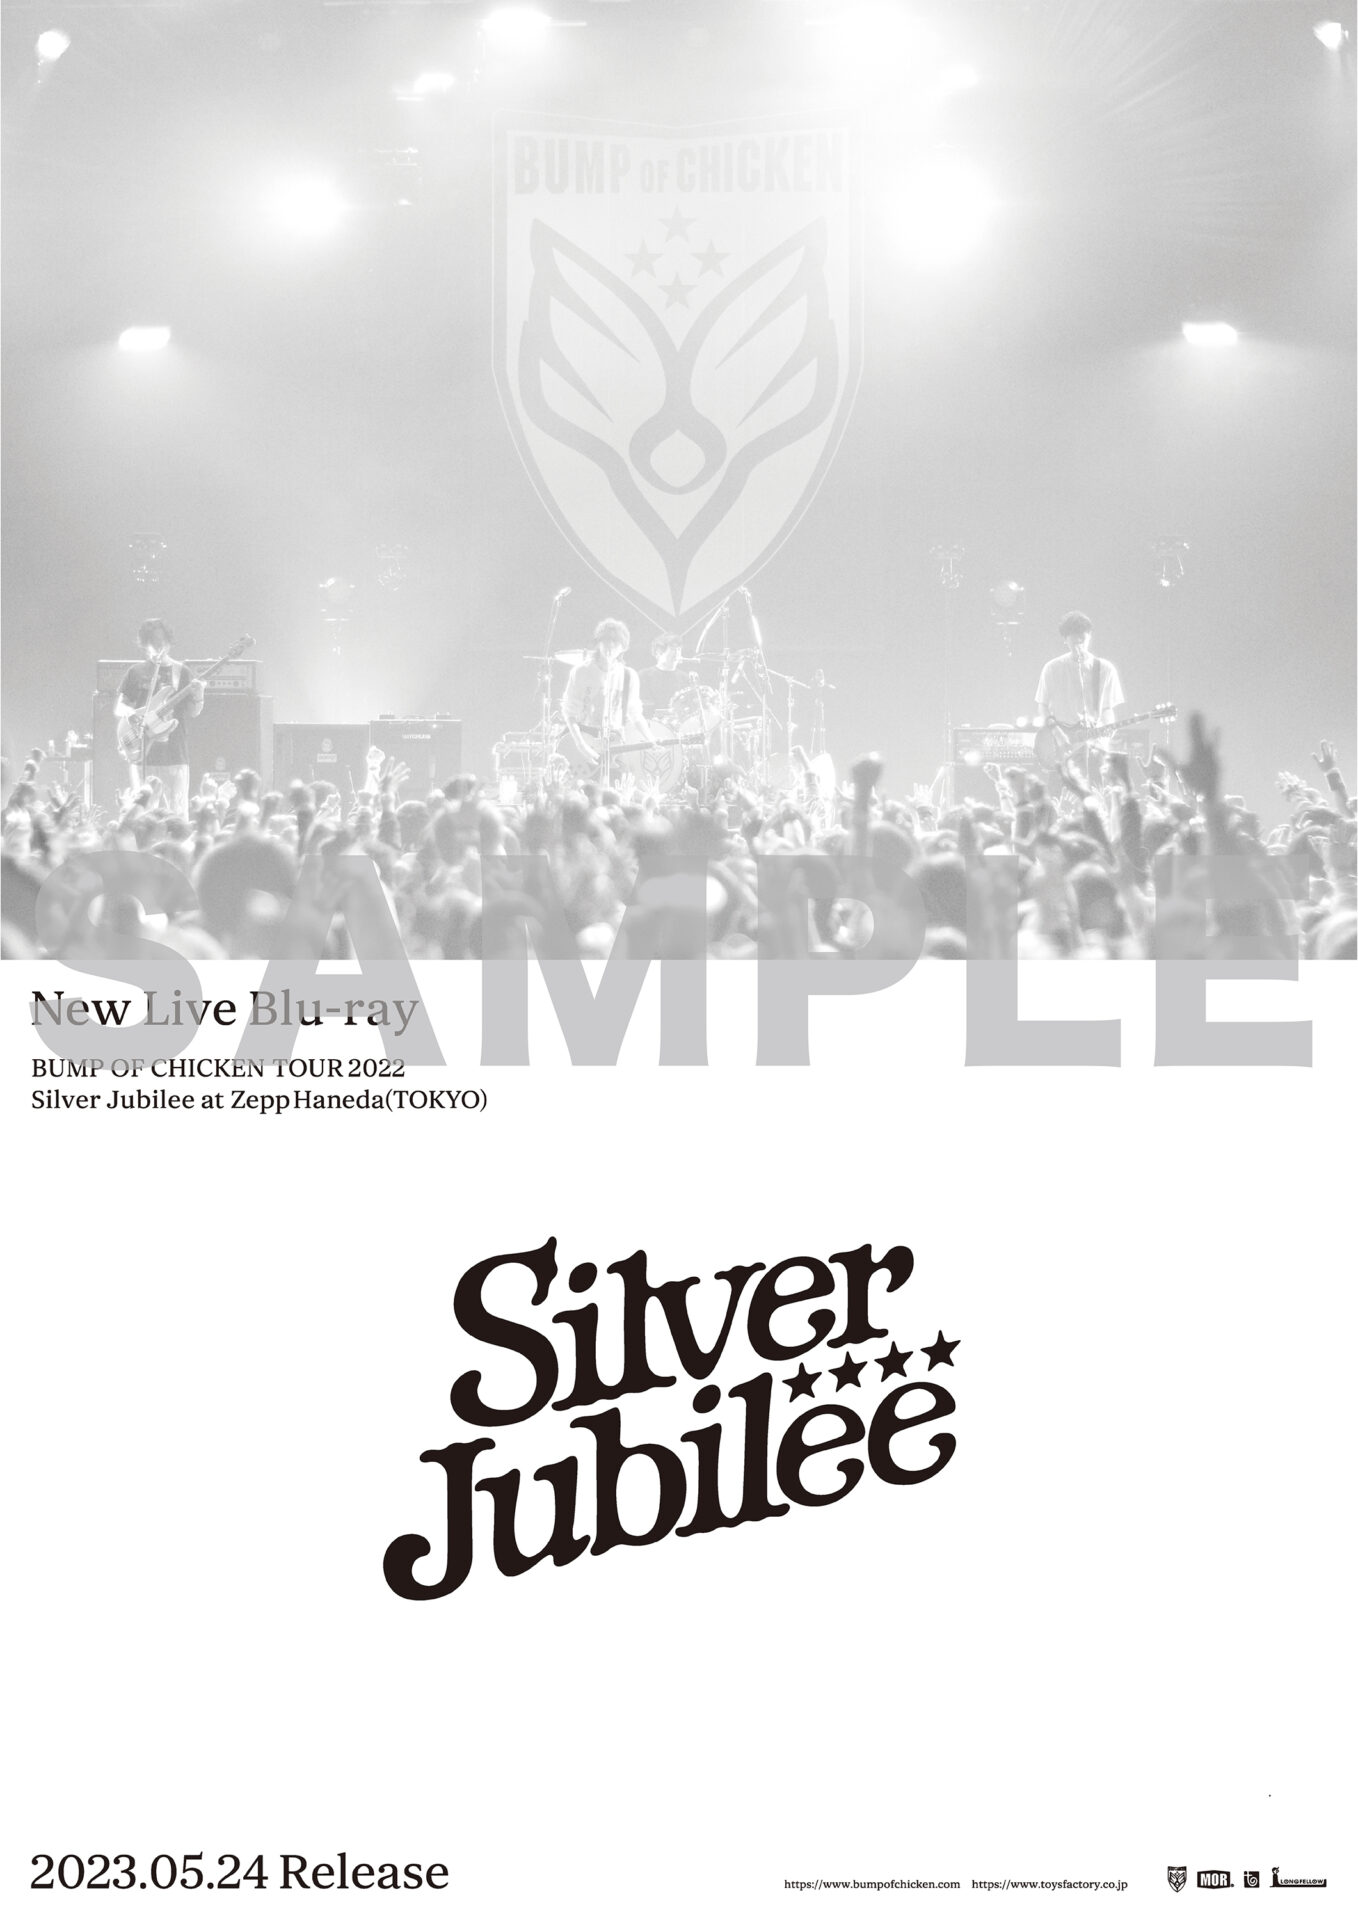 BUMP OF CHICKEN Silver Jubilee Tourジャケット | nate-hospital.com